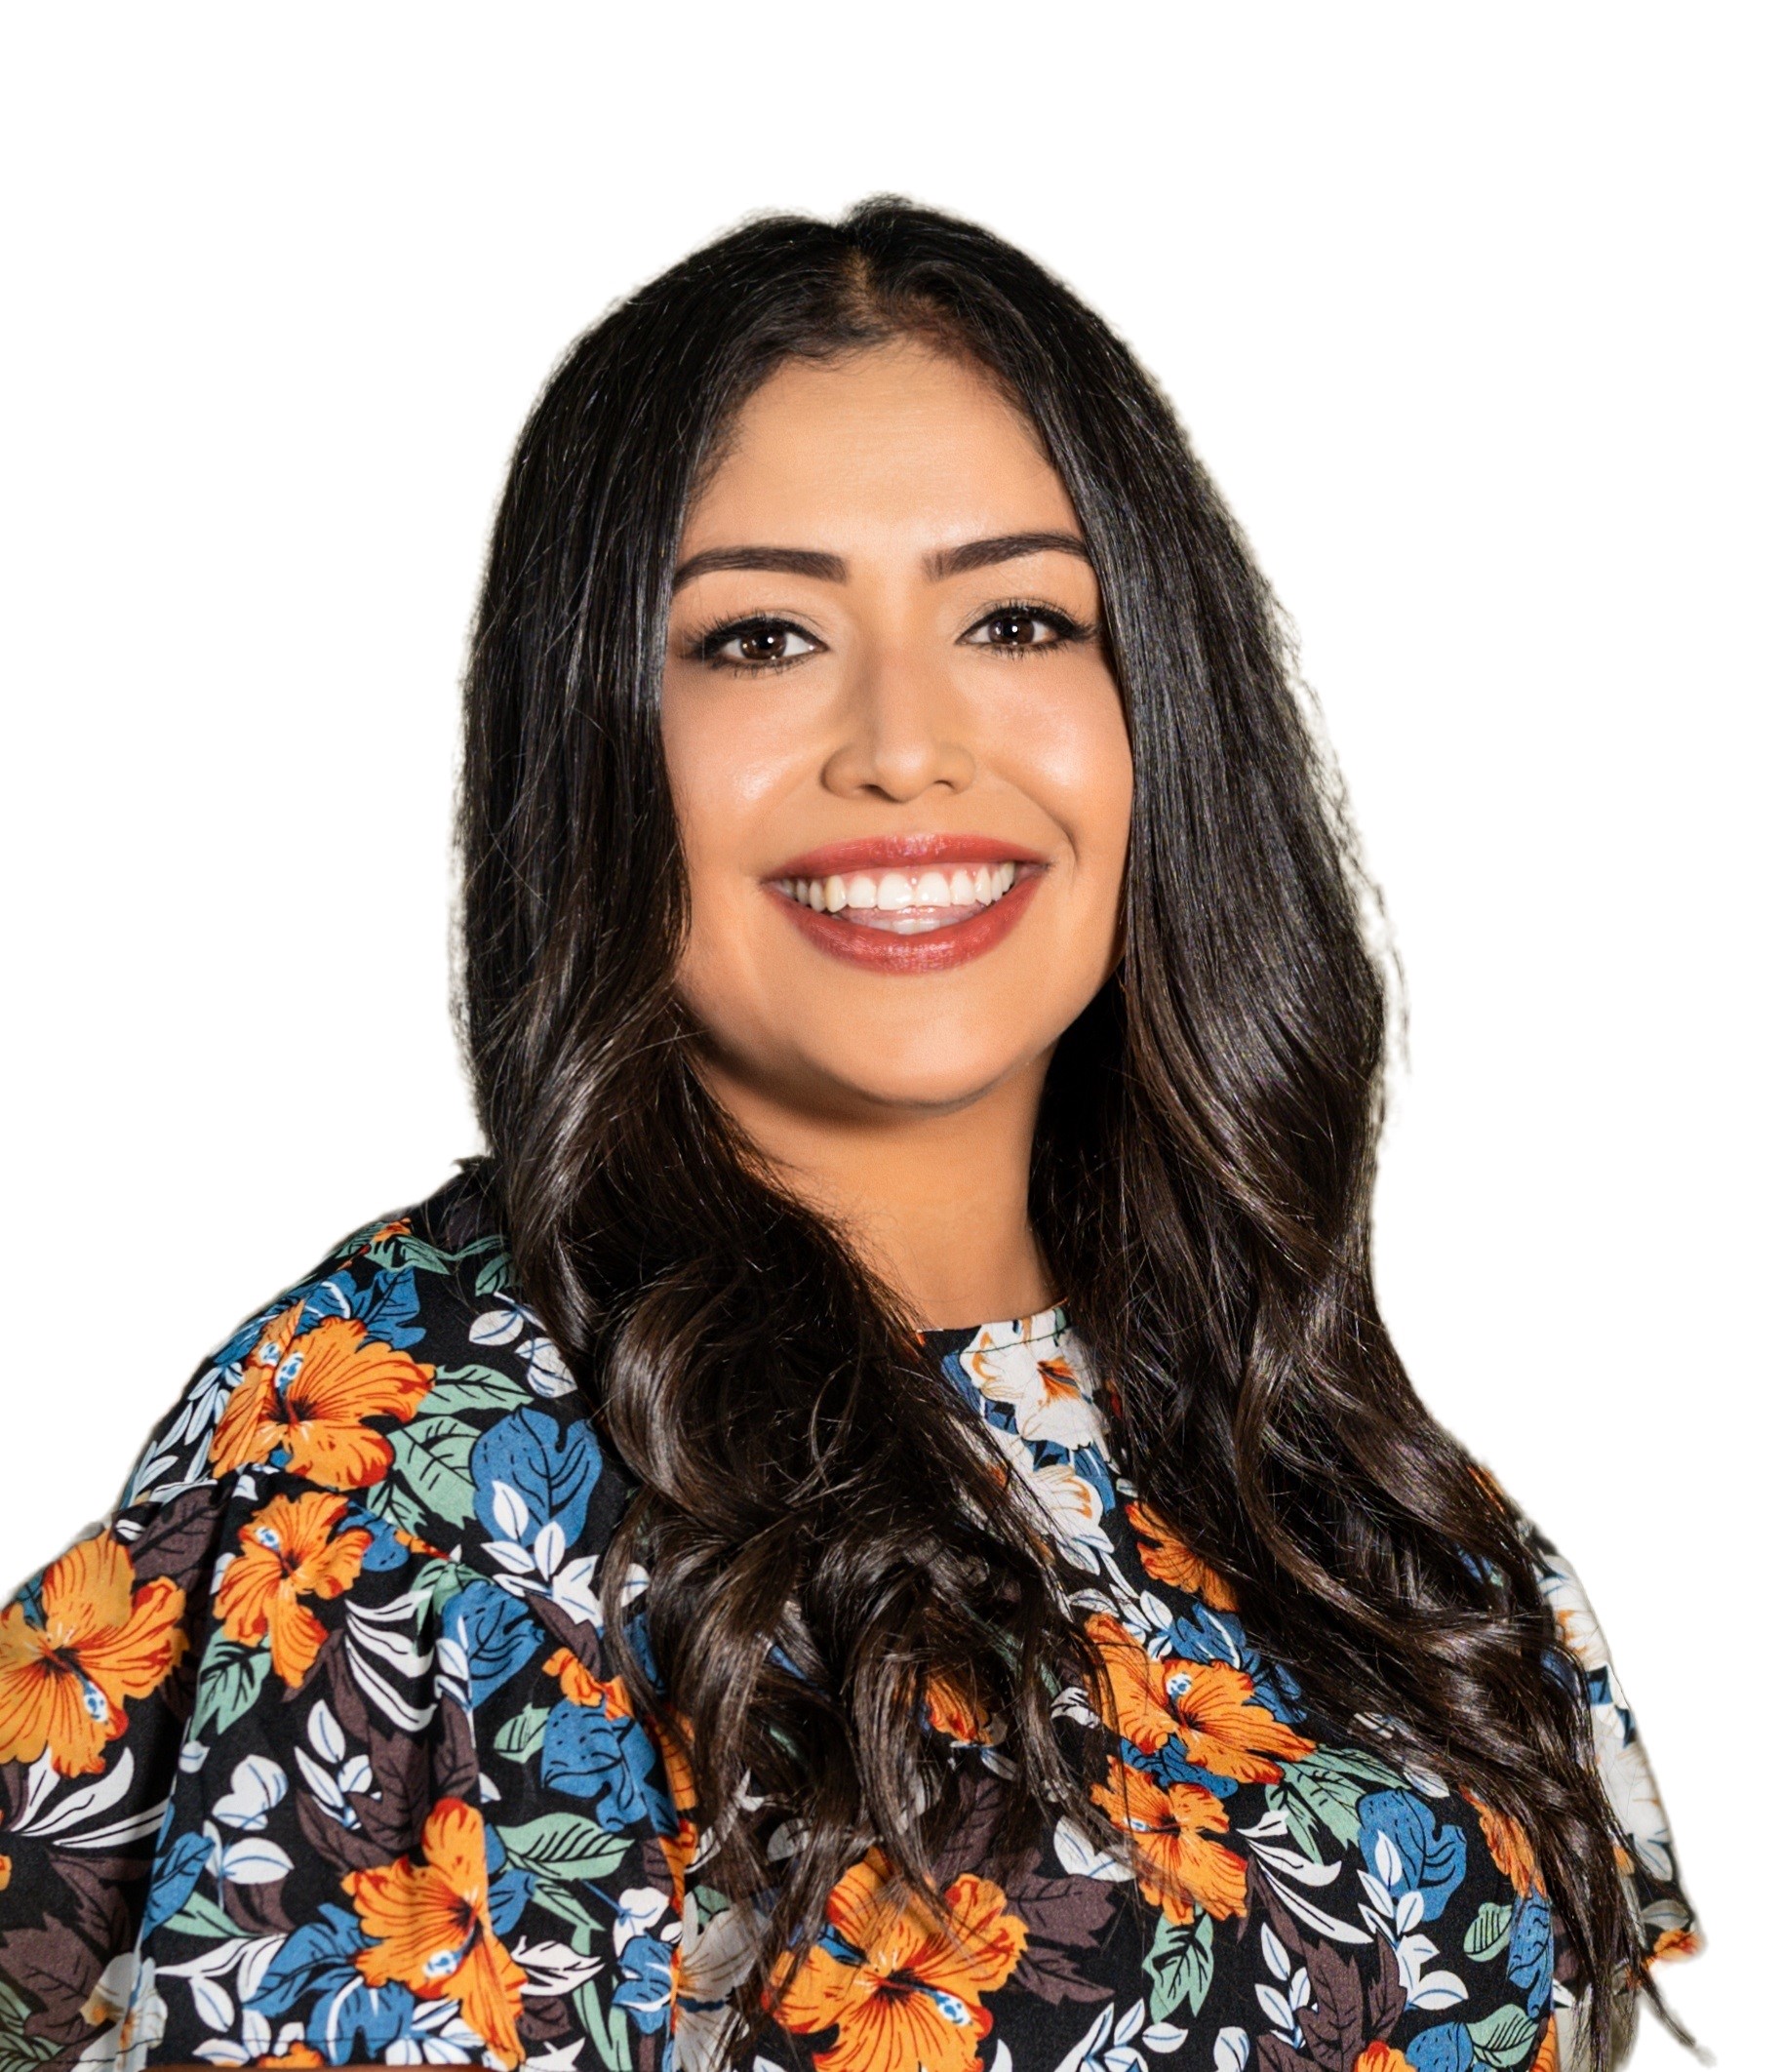 Belgica has worked with students and parents in City Heights schools for over 11 years. She is currently a School Counselor at Horace Mann Middle School. She joined the Aaron Price Fellows Program in 2019.